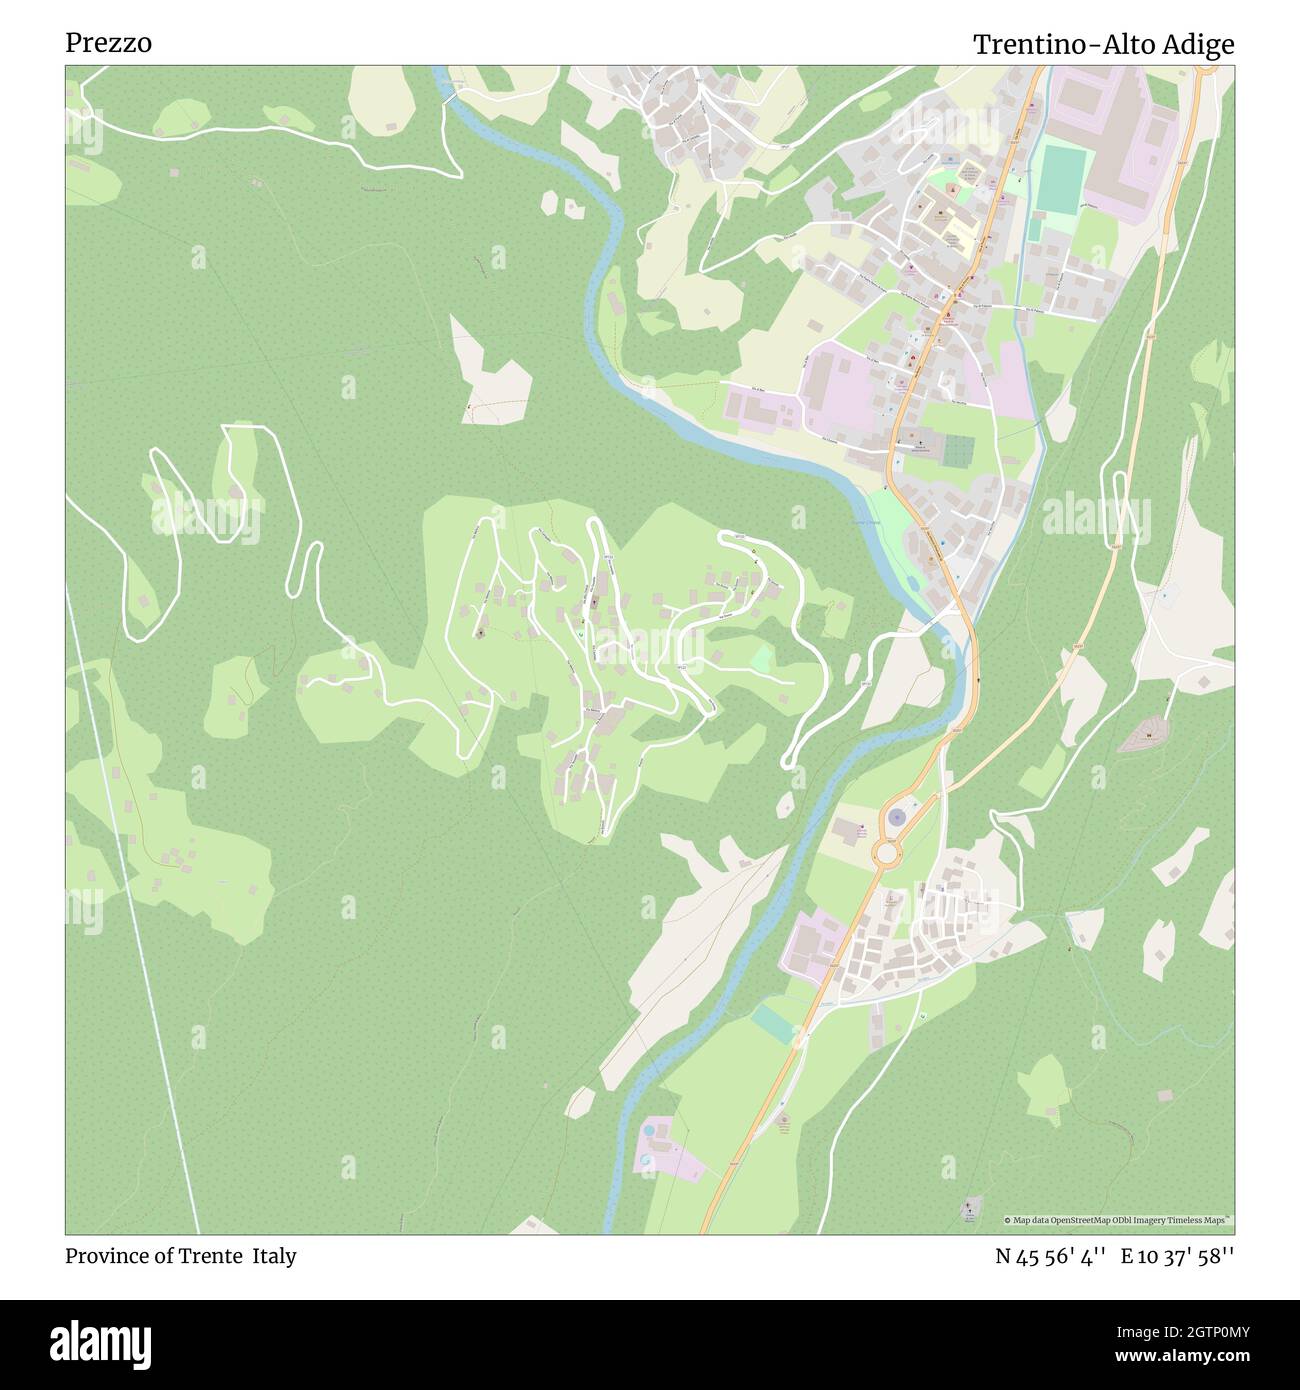 Prezzo, Province of Trente, Italy, Trentino-Alto Adige, N 45 56' 4'', E 10 37' 58'', map, Timeless Map published in 2021. Travelers, explorers and adventurers like Florence Nightingale, David Livingstone, Ernest Shackleton, Lewis and Clark and Sherlock Holmes relied on maps to plan travels to the world's most remote corners, Timeless Maps is mapping most locations on the globe, showing the achievement of great dreams Stock Photo